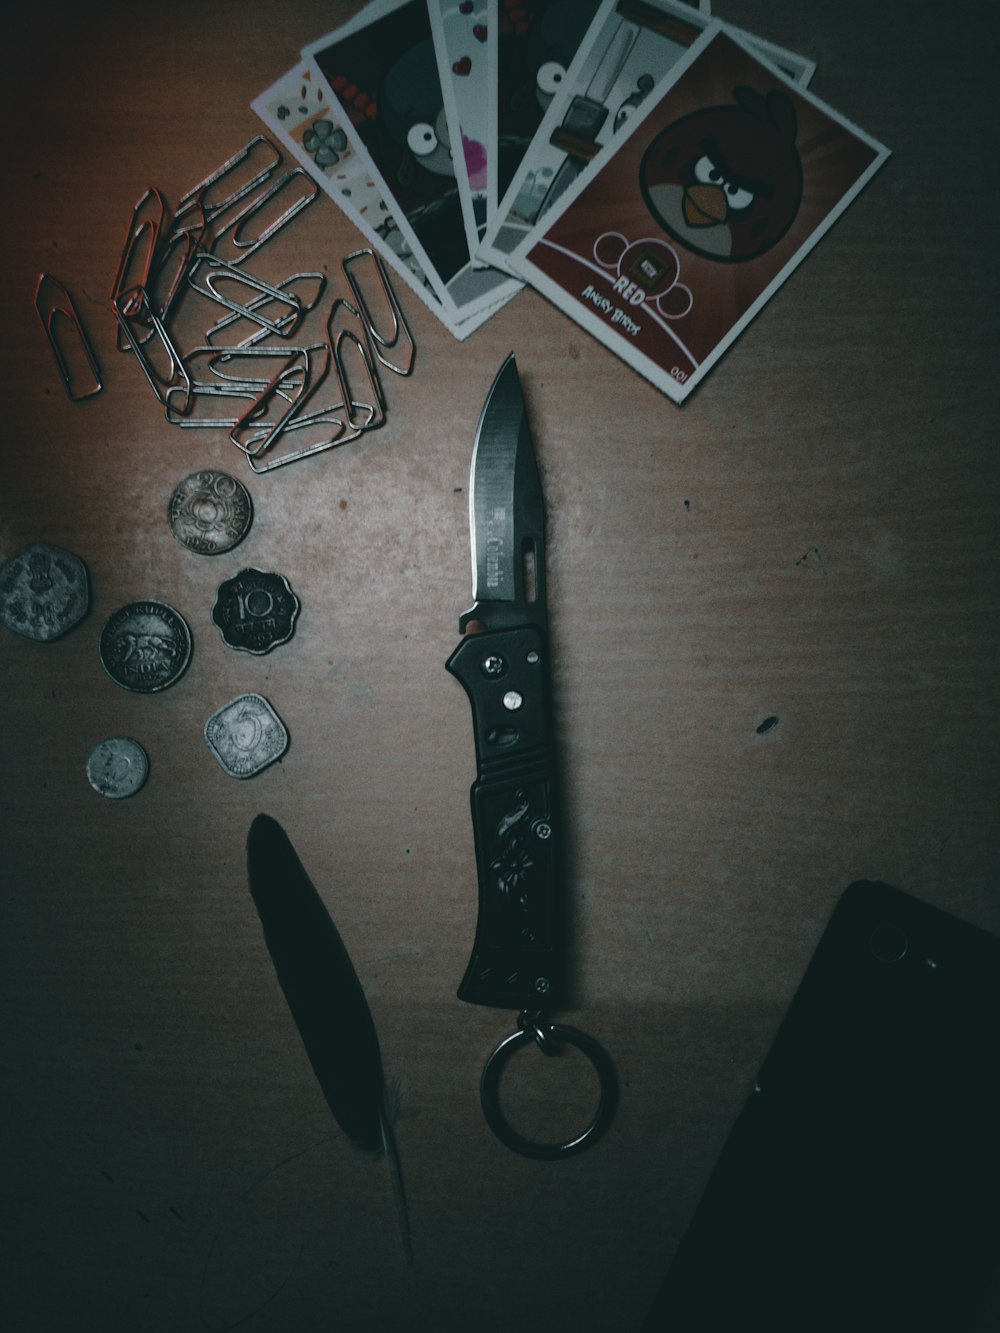 black handle knife beside playing cards